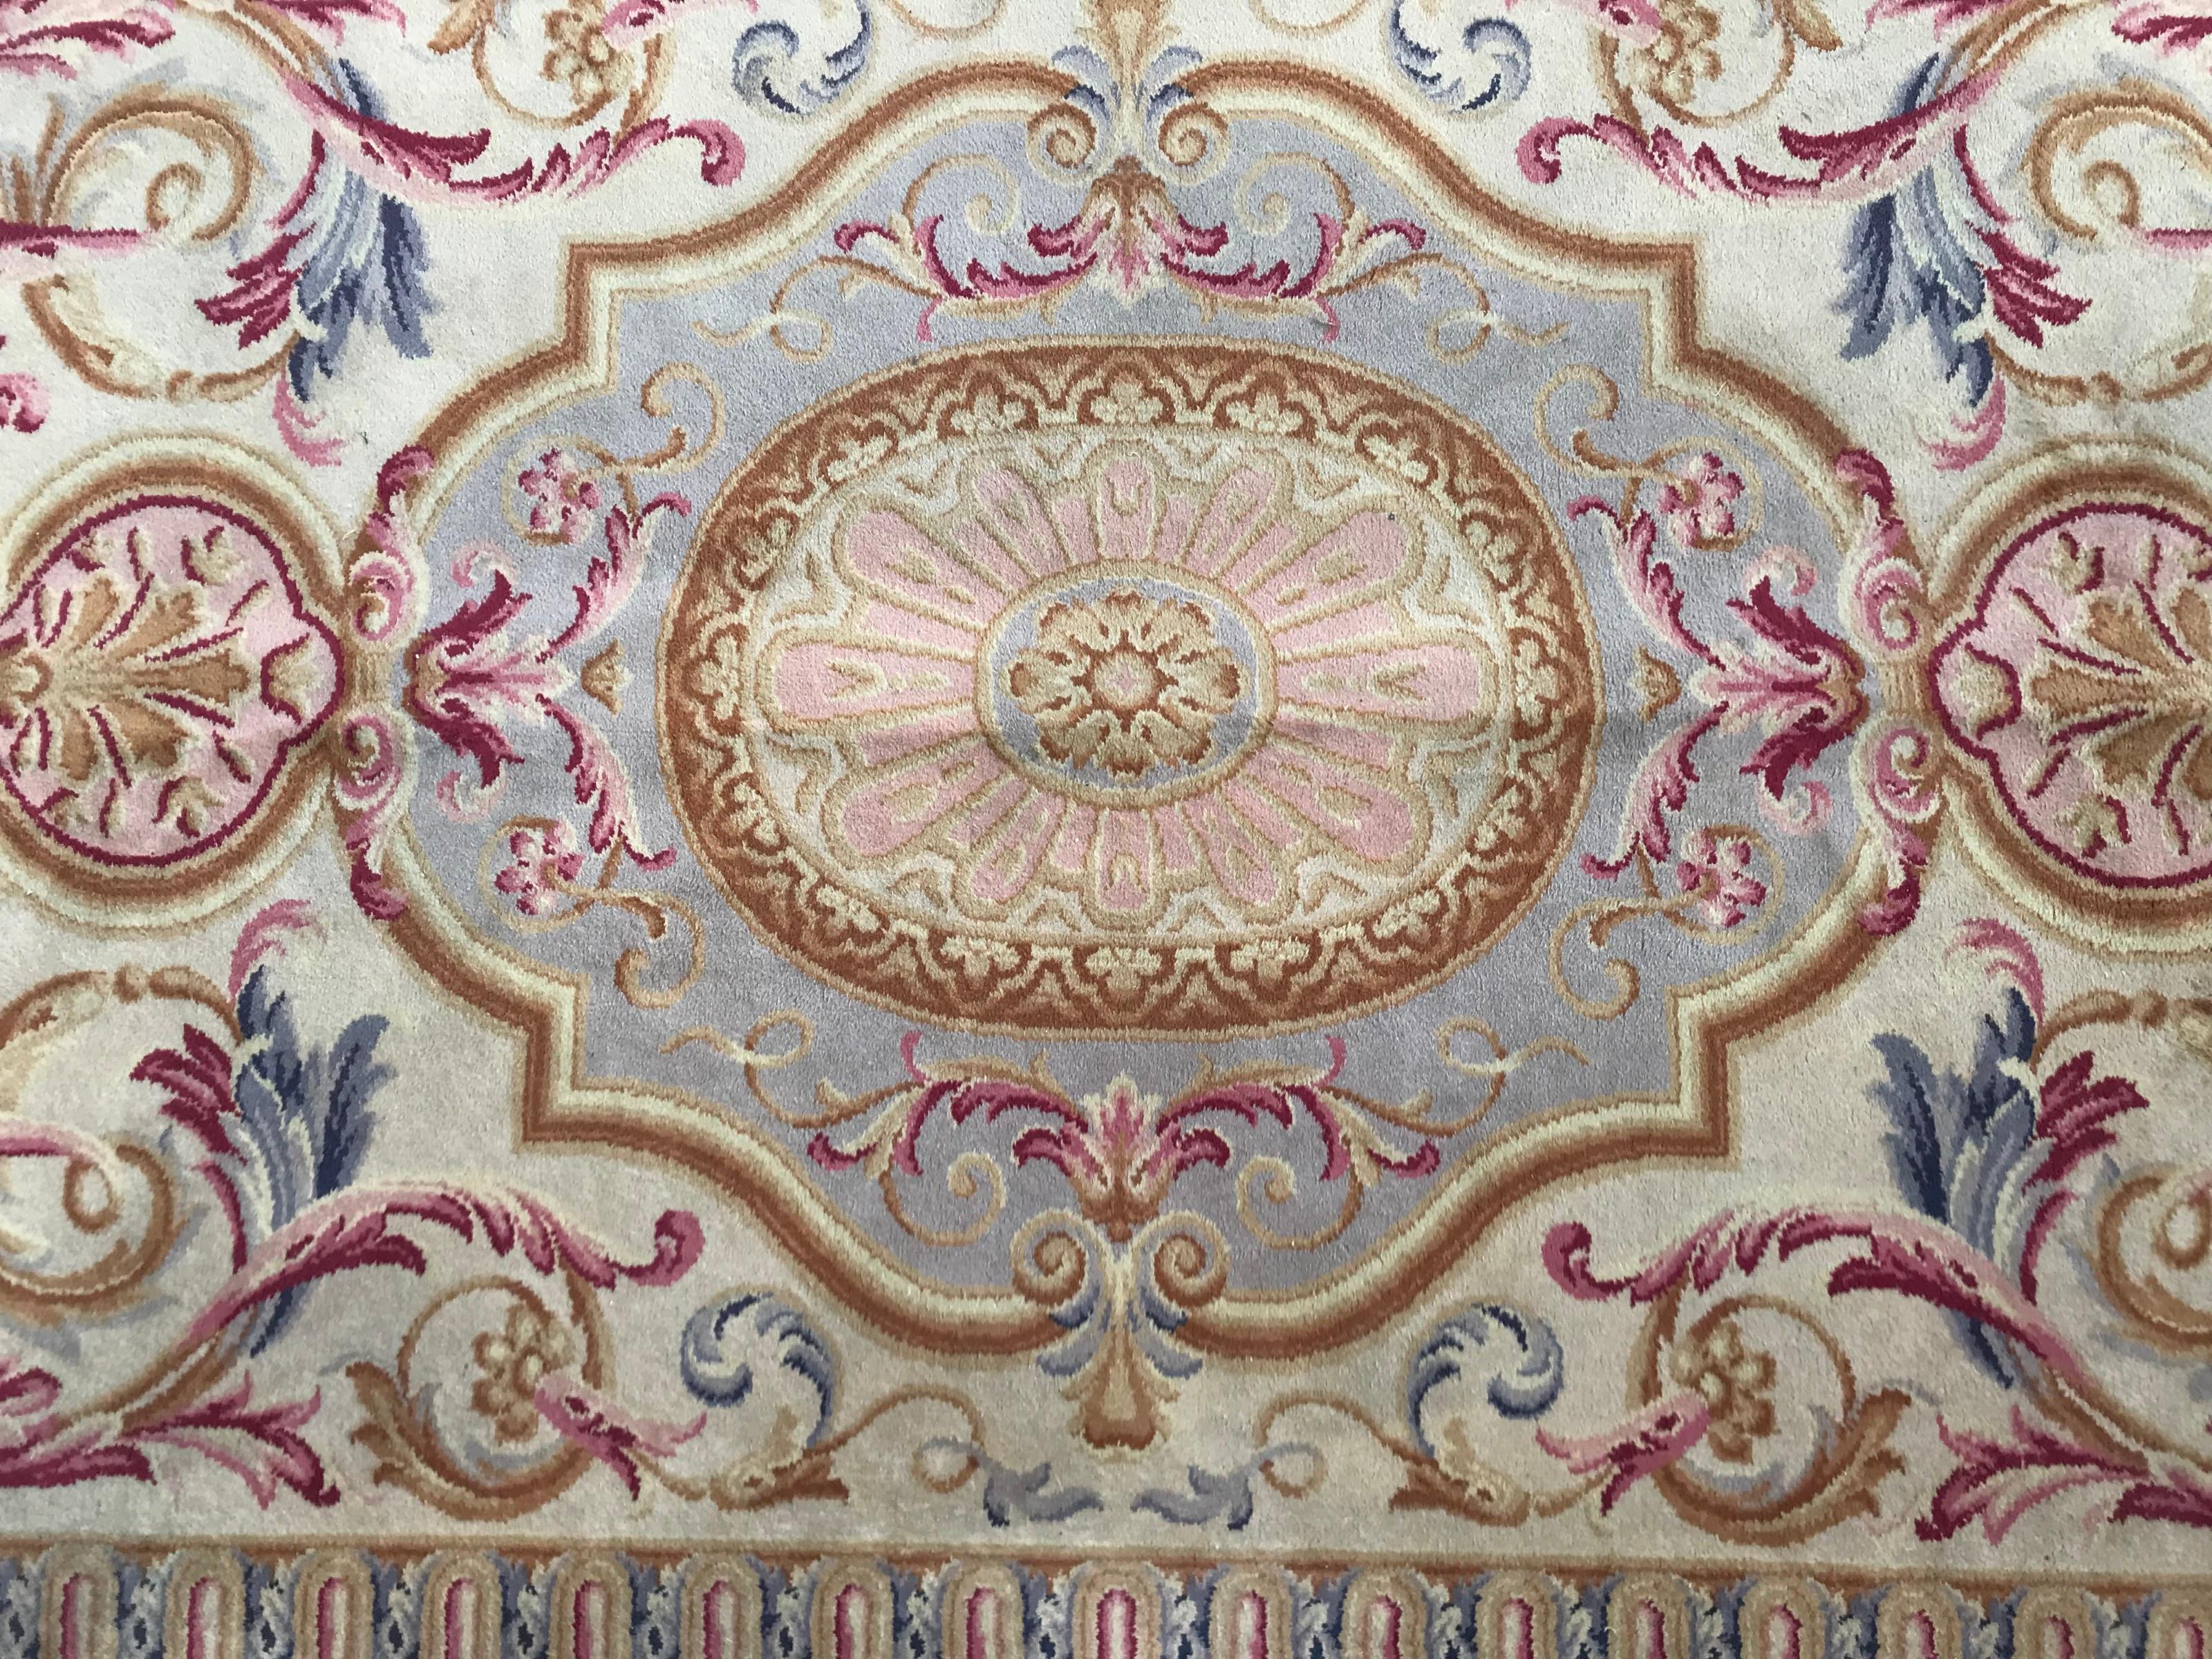 Beautiful knotted rug with a nice floral design of Louis XVI (Louis 16th) Savonnerie’s, beautiful colors with pink, blue, green and brown colors. Entirely knotted with Wool velvet on cotton foundation.

✨✨✨
